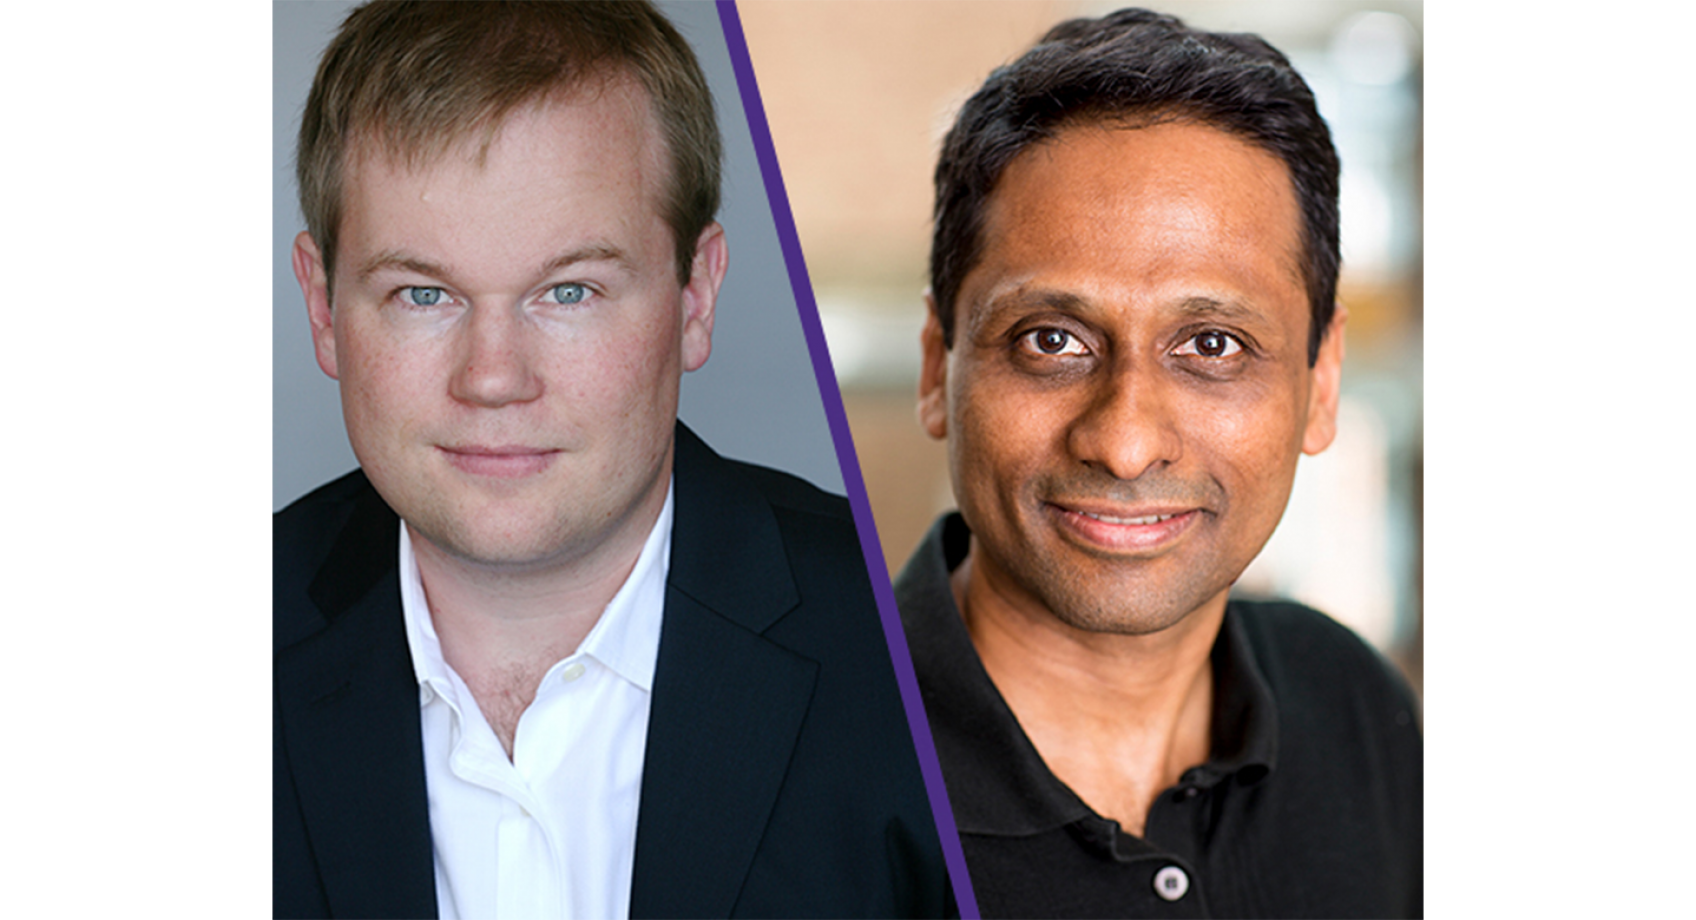 UW ECE Professor Michael Taylor and the Allen School’s Arvind Krishnamurthy will help spur innovation in distributed computing as part of new multi-university research center Banner